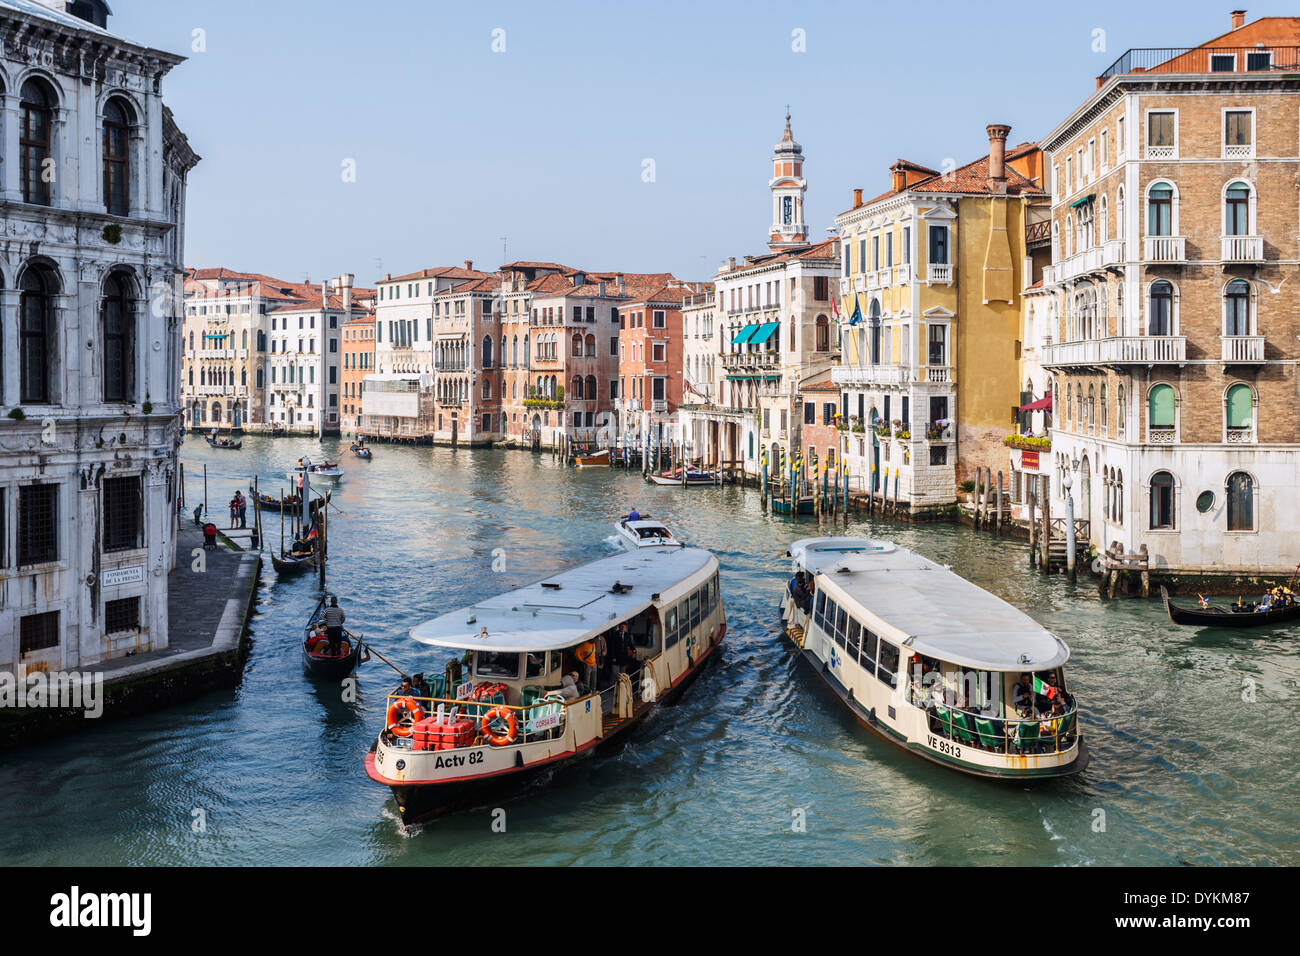 Vaporetto (Waterbus) on the Grand Canal in Venice, Italy. Stock Photo